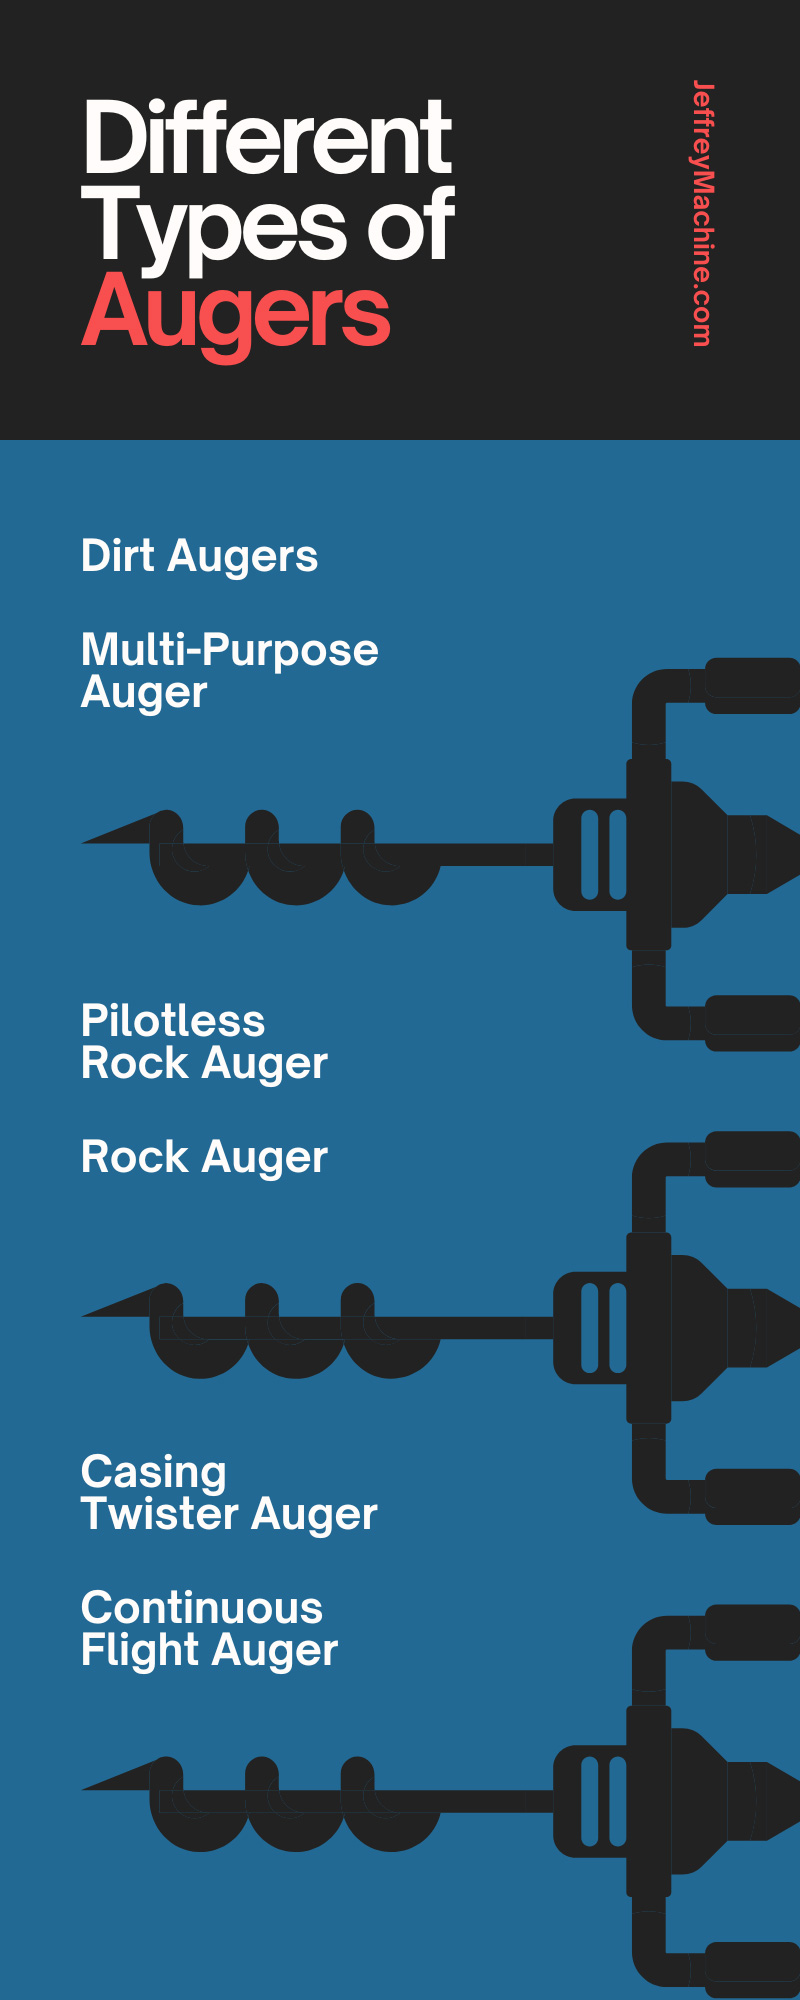 The Complete Guide to Different Types of Augers